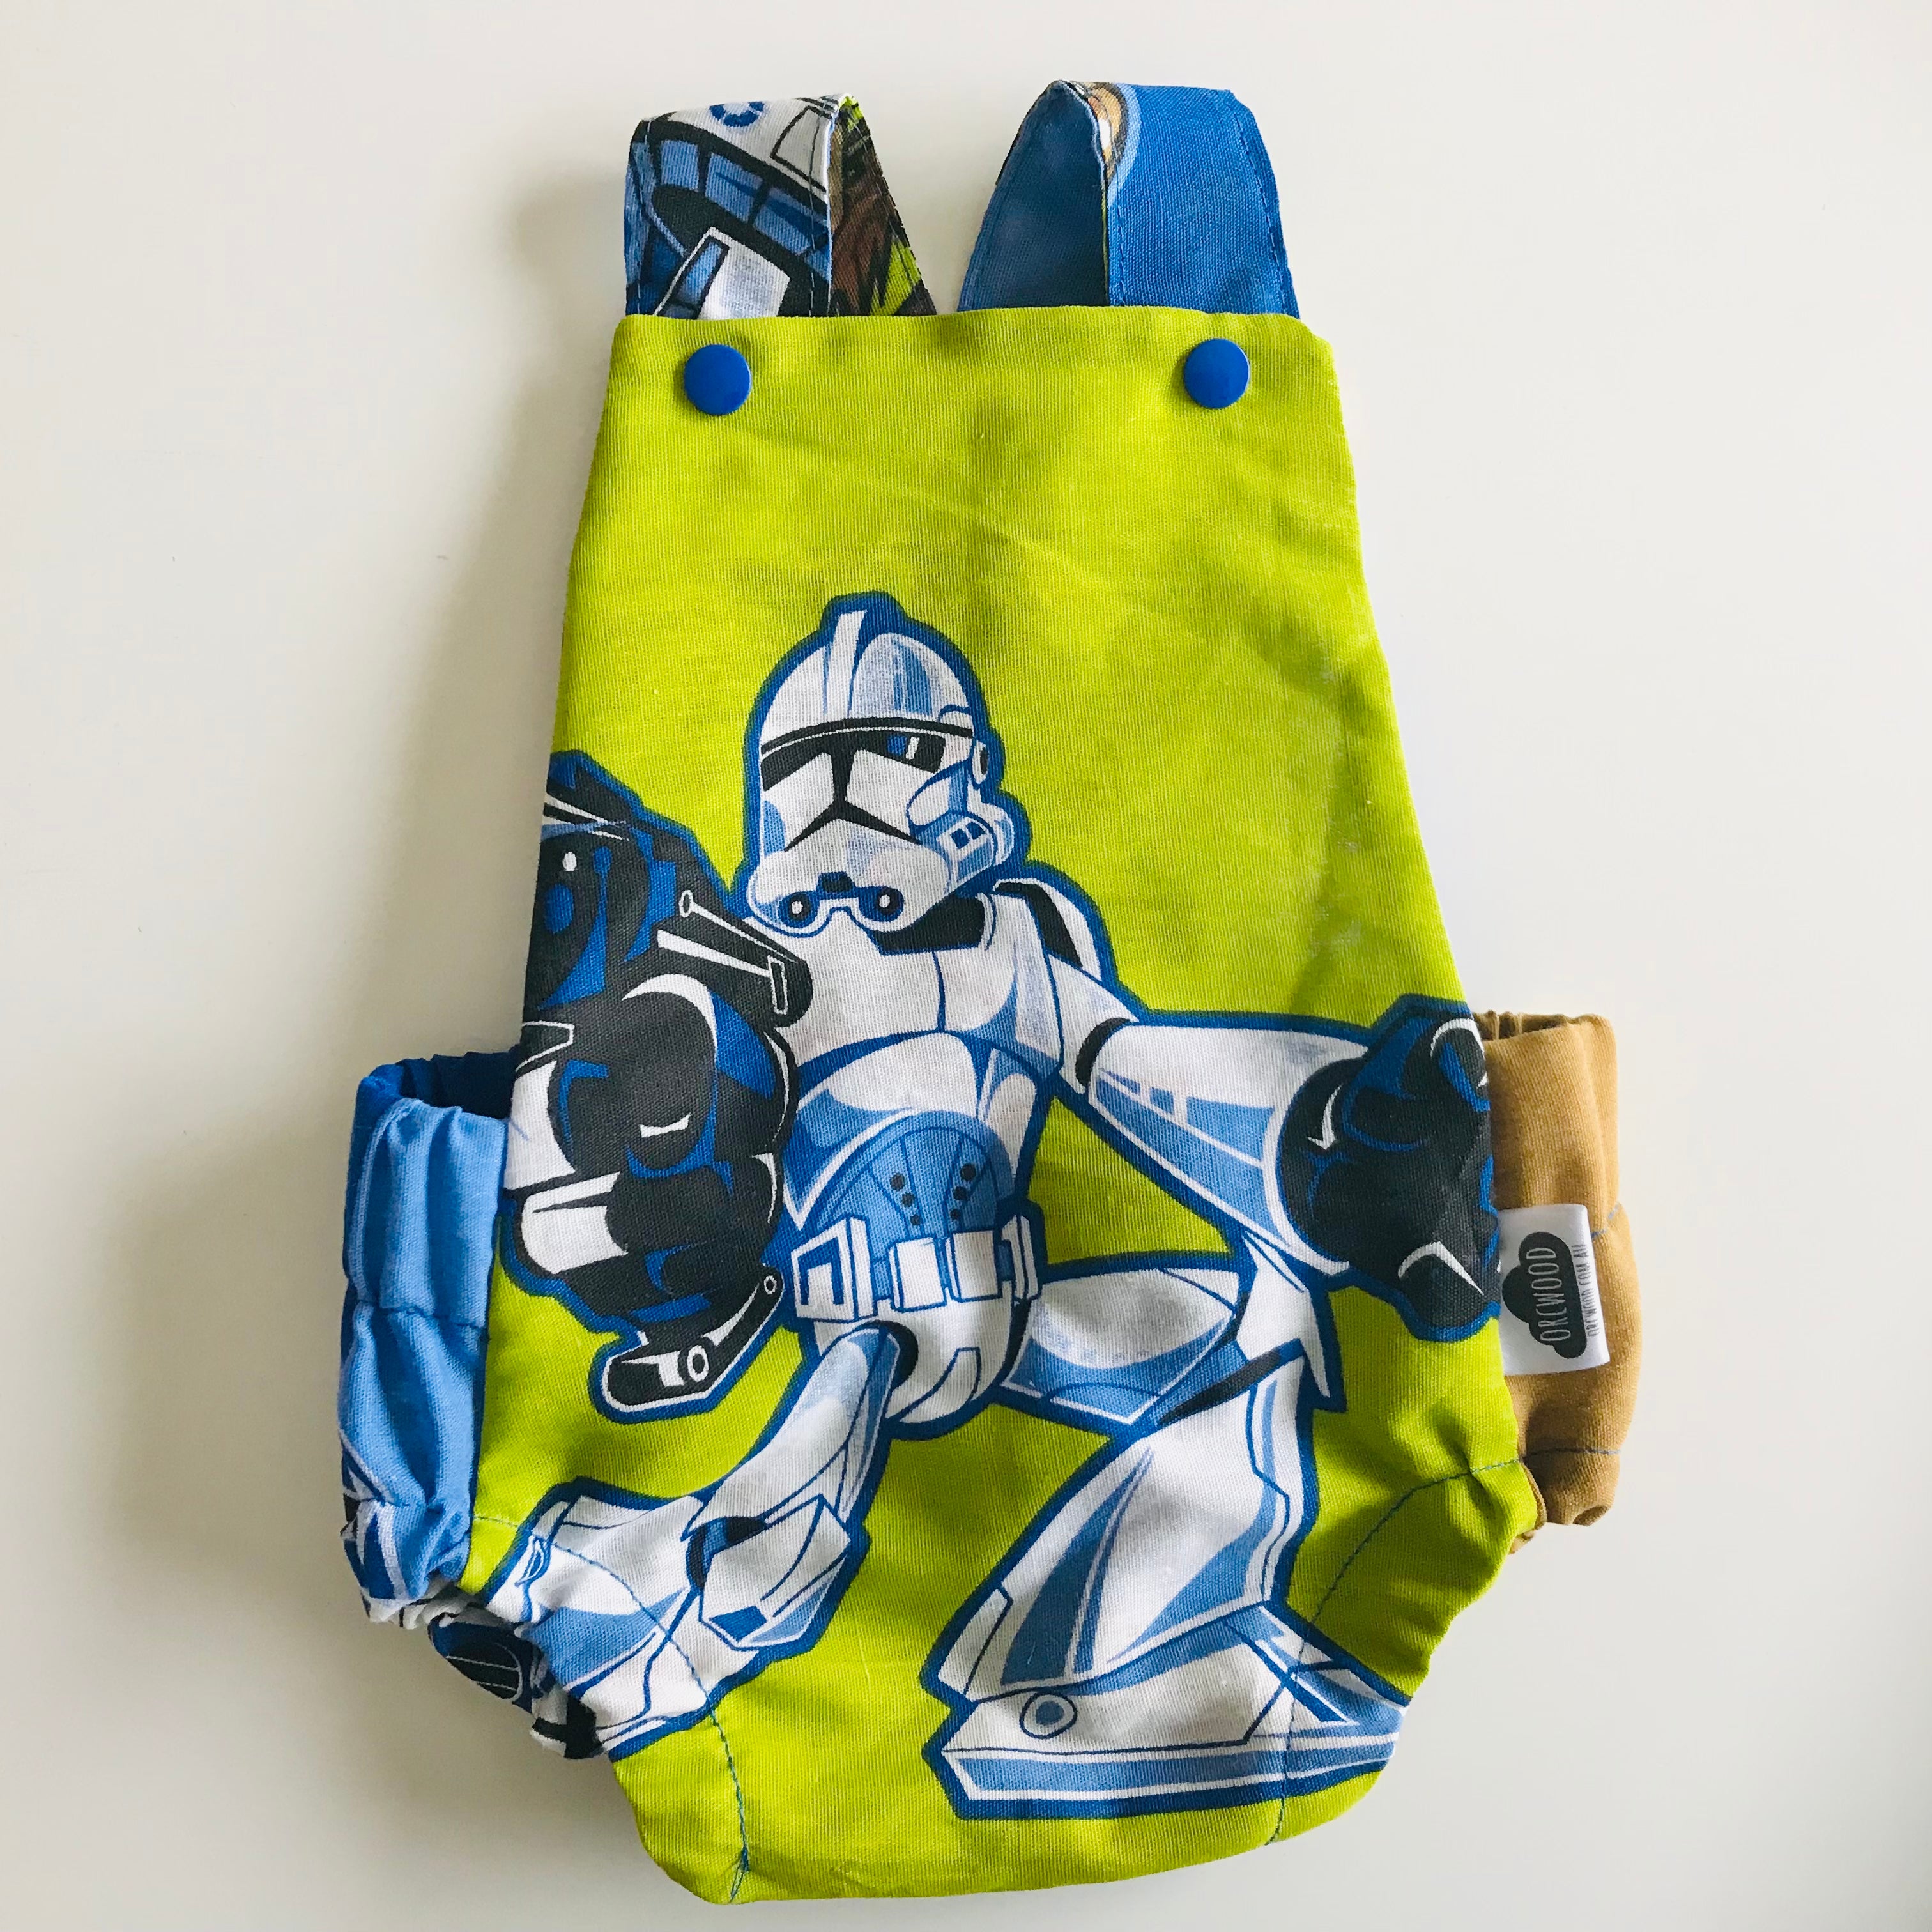 Baby Toddler Summer Romper - Upcycled Star Wars